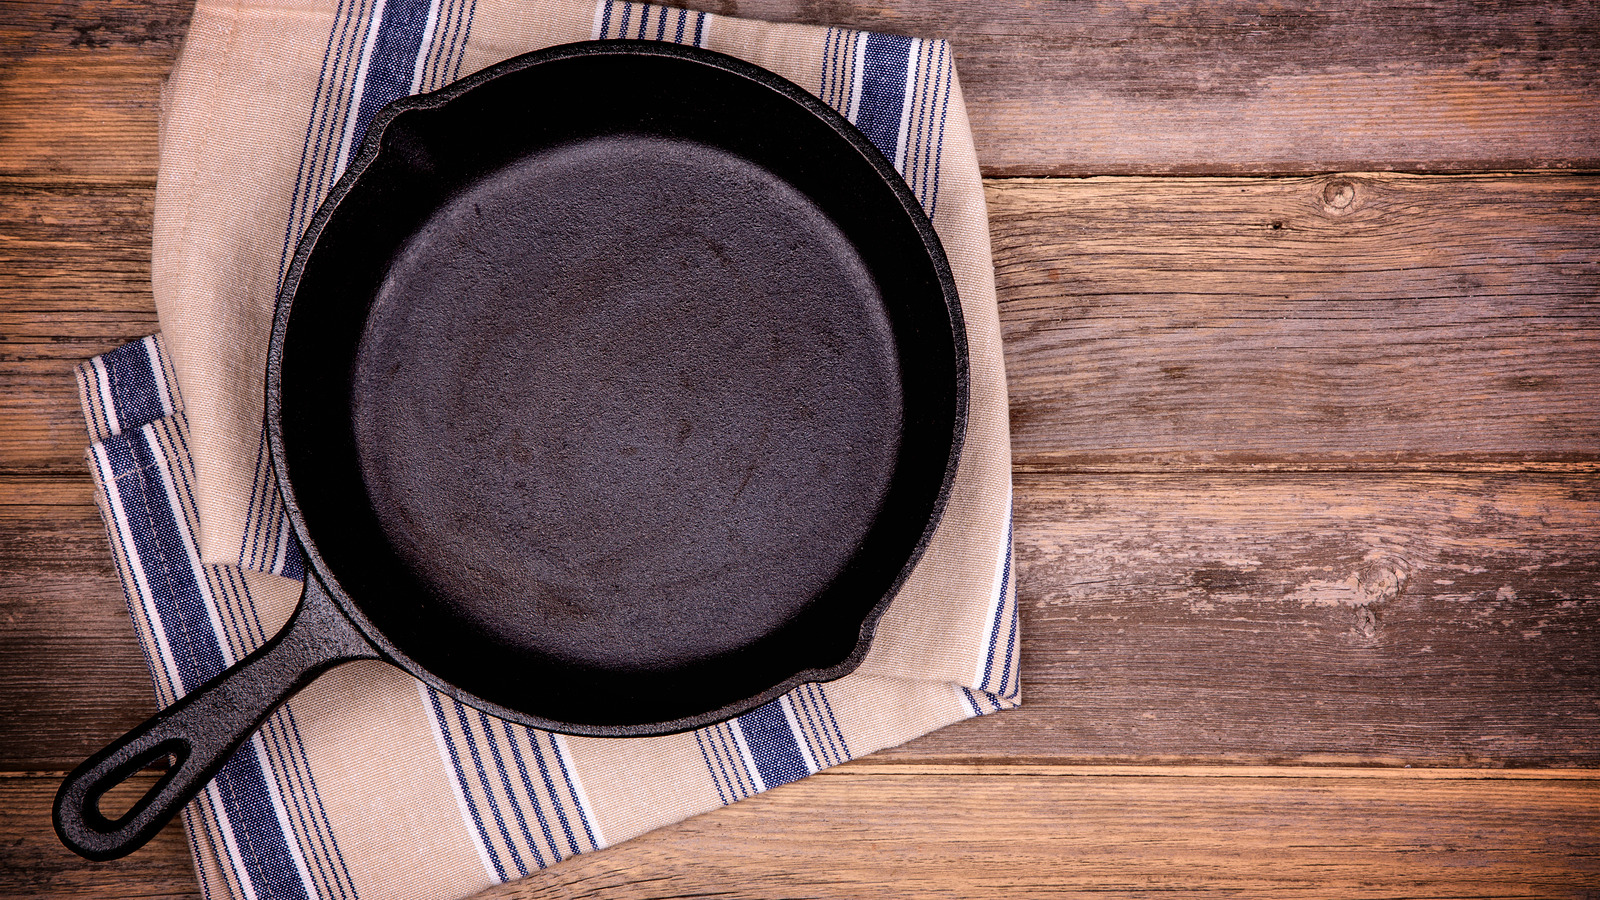 https://www.thedailymeal.com/img/gallery/the-ultimate-guide-to-cast-iron-cookware/l-intro-1680139330.jpg